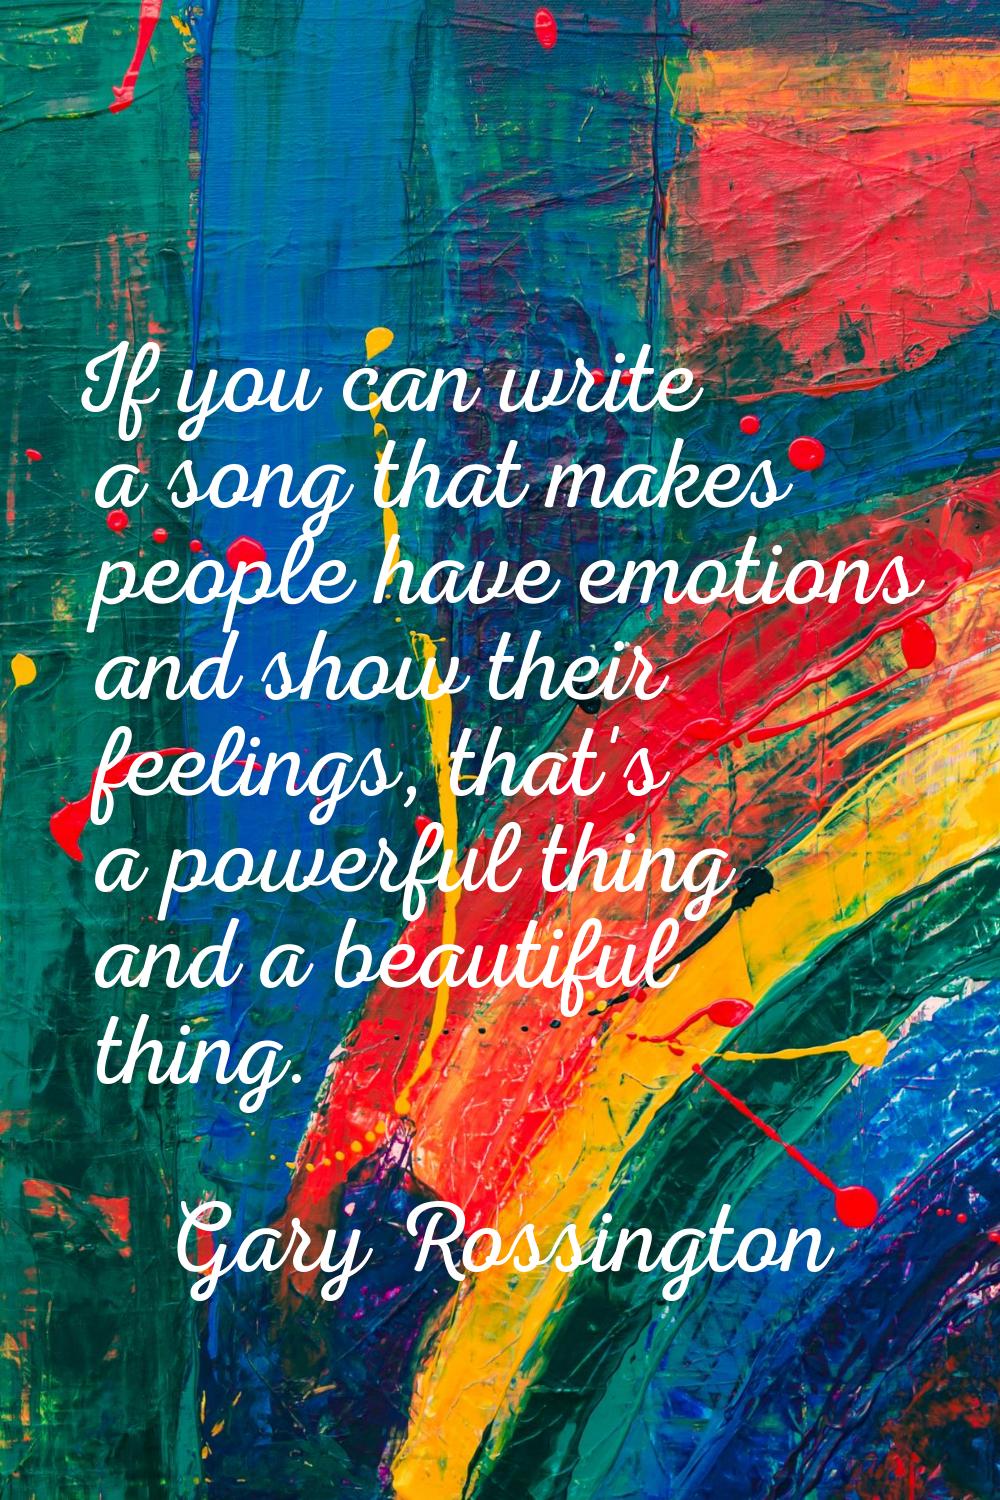 If you can write a song that makes people have emotions and show their feelings, that's a powerful 